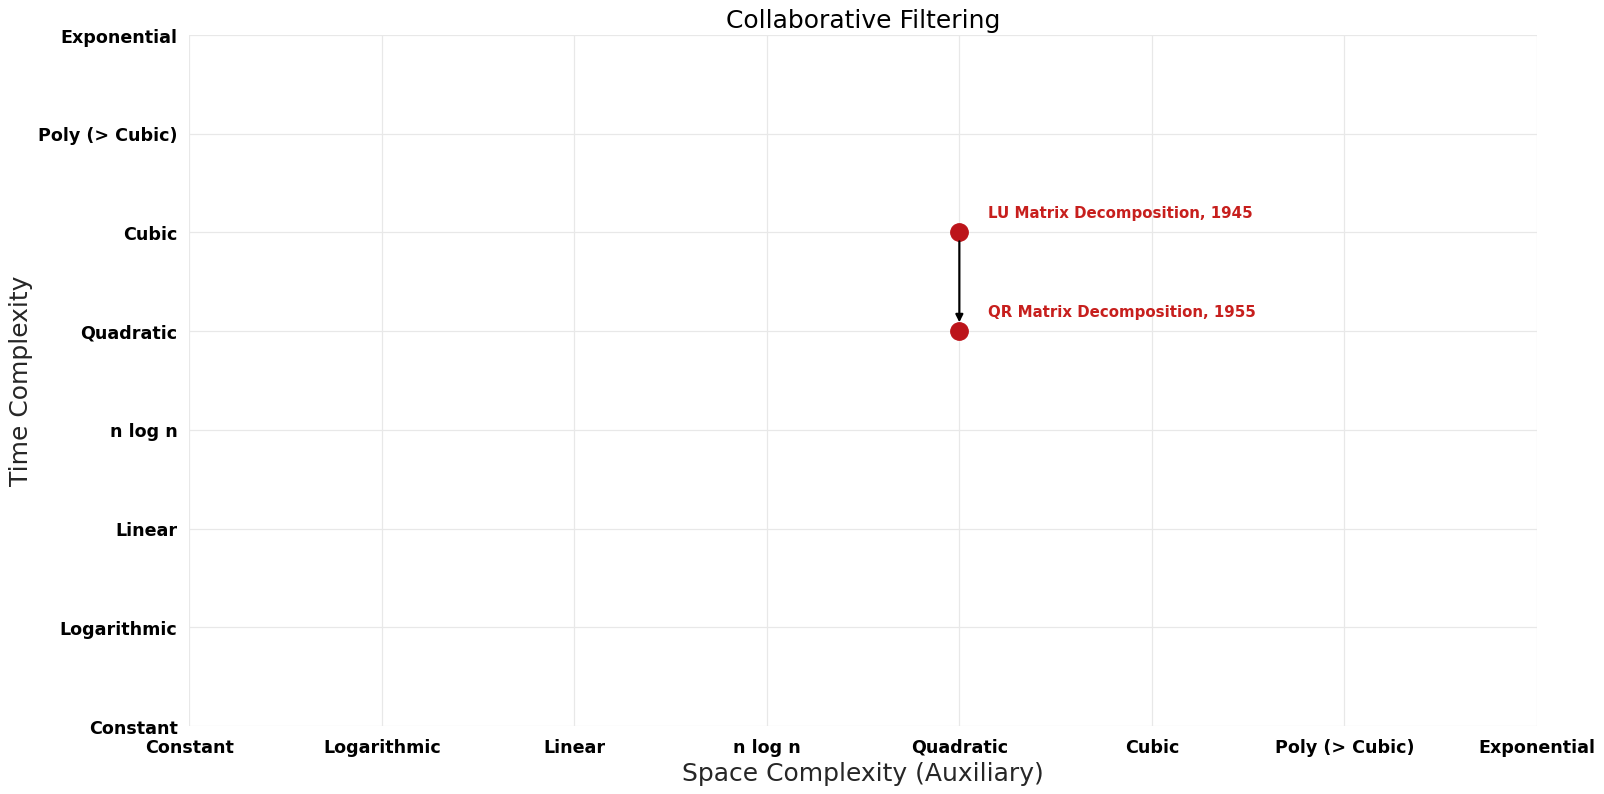 File:Collaborative Filtering - Pareto Frontier.png